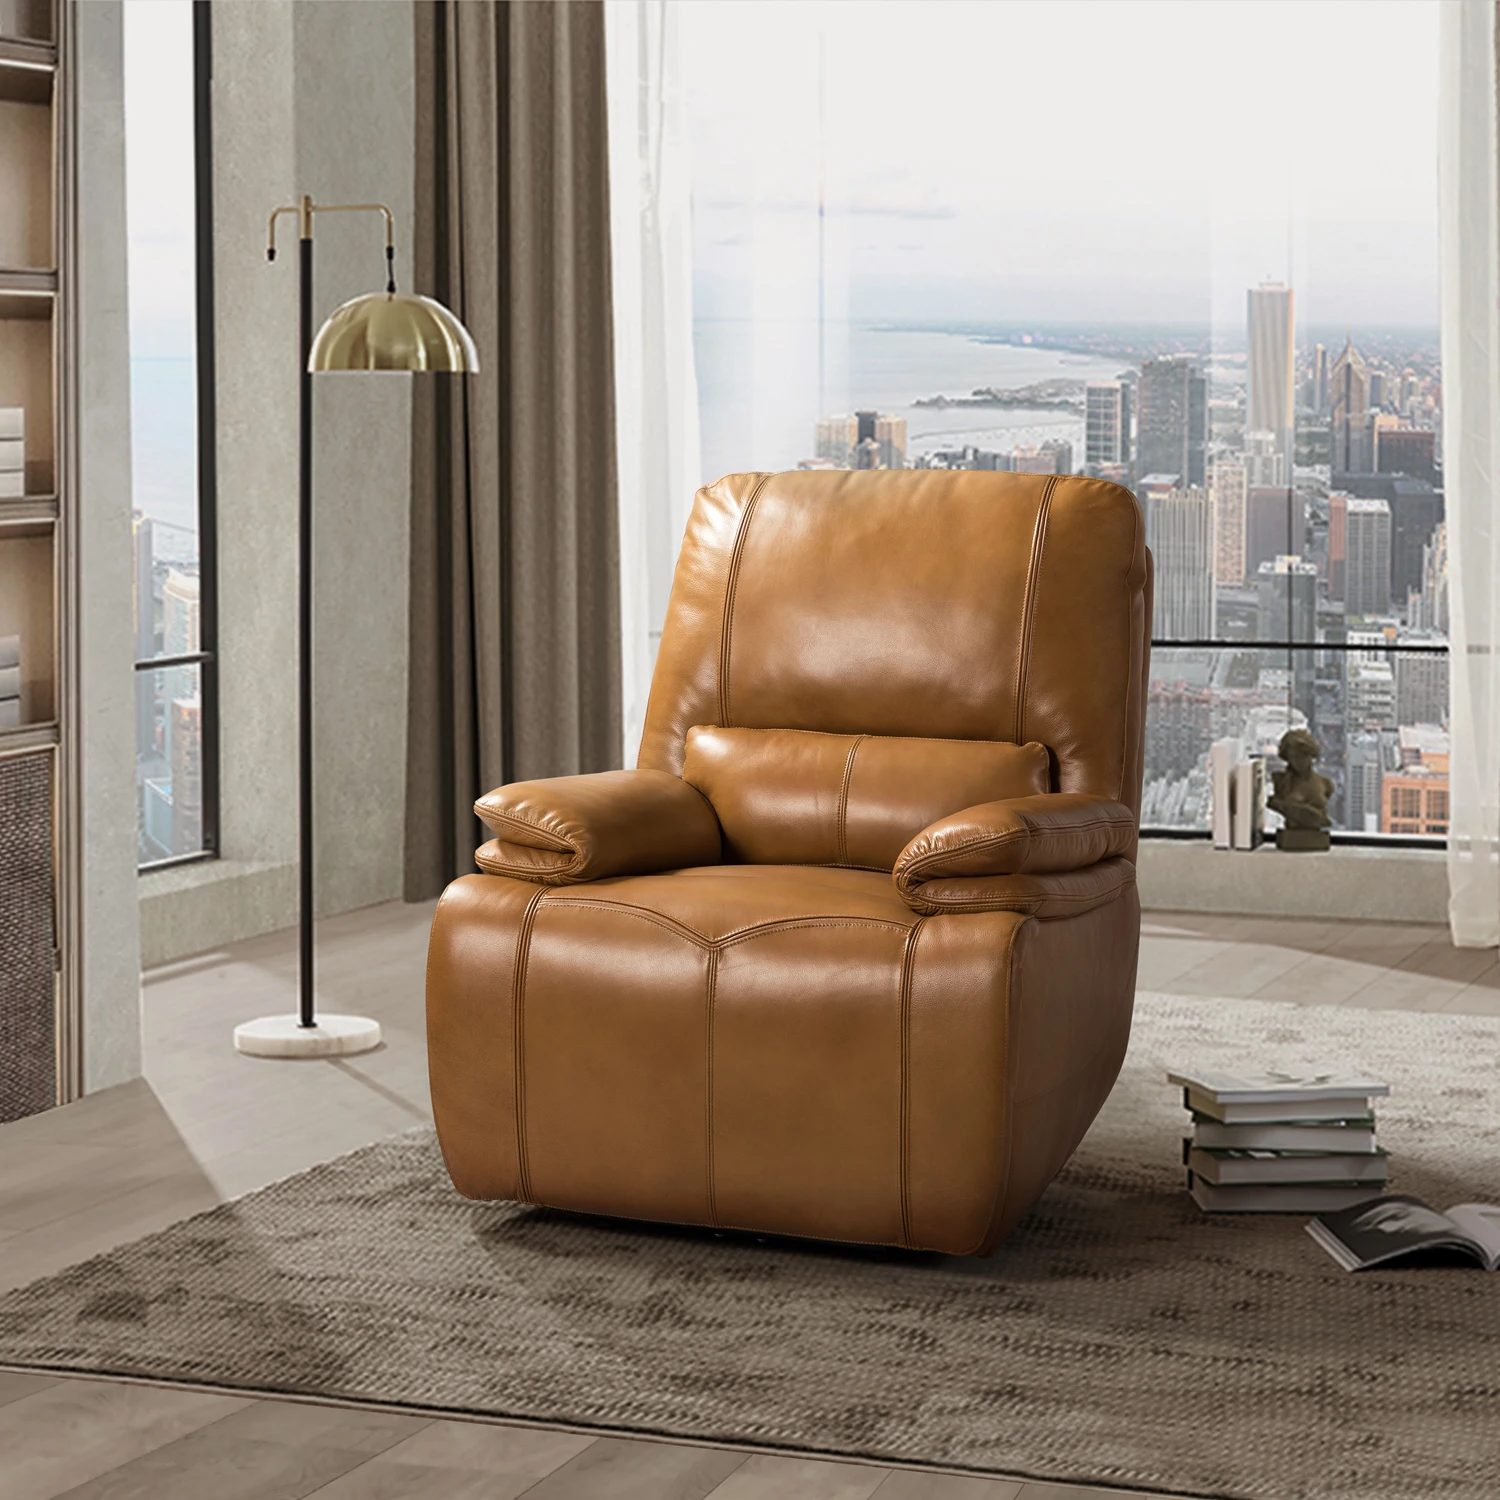 

Recliner Supplier Living Room Furniture Leisure Comfortable Recliner Sofa Chair, Customized color